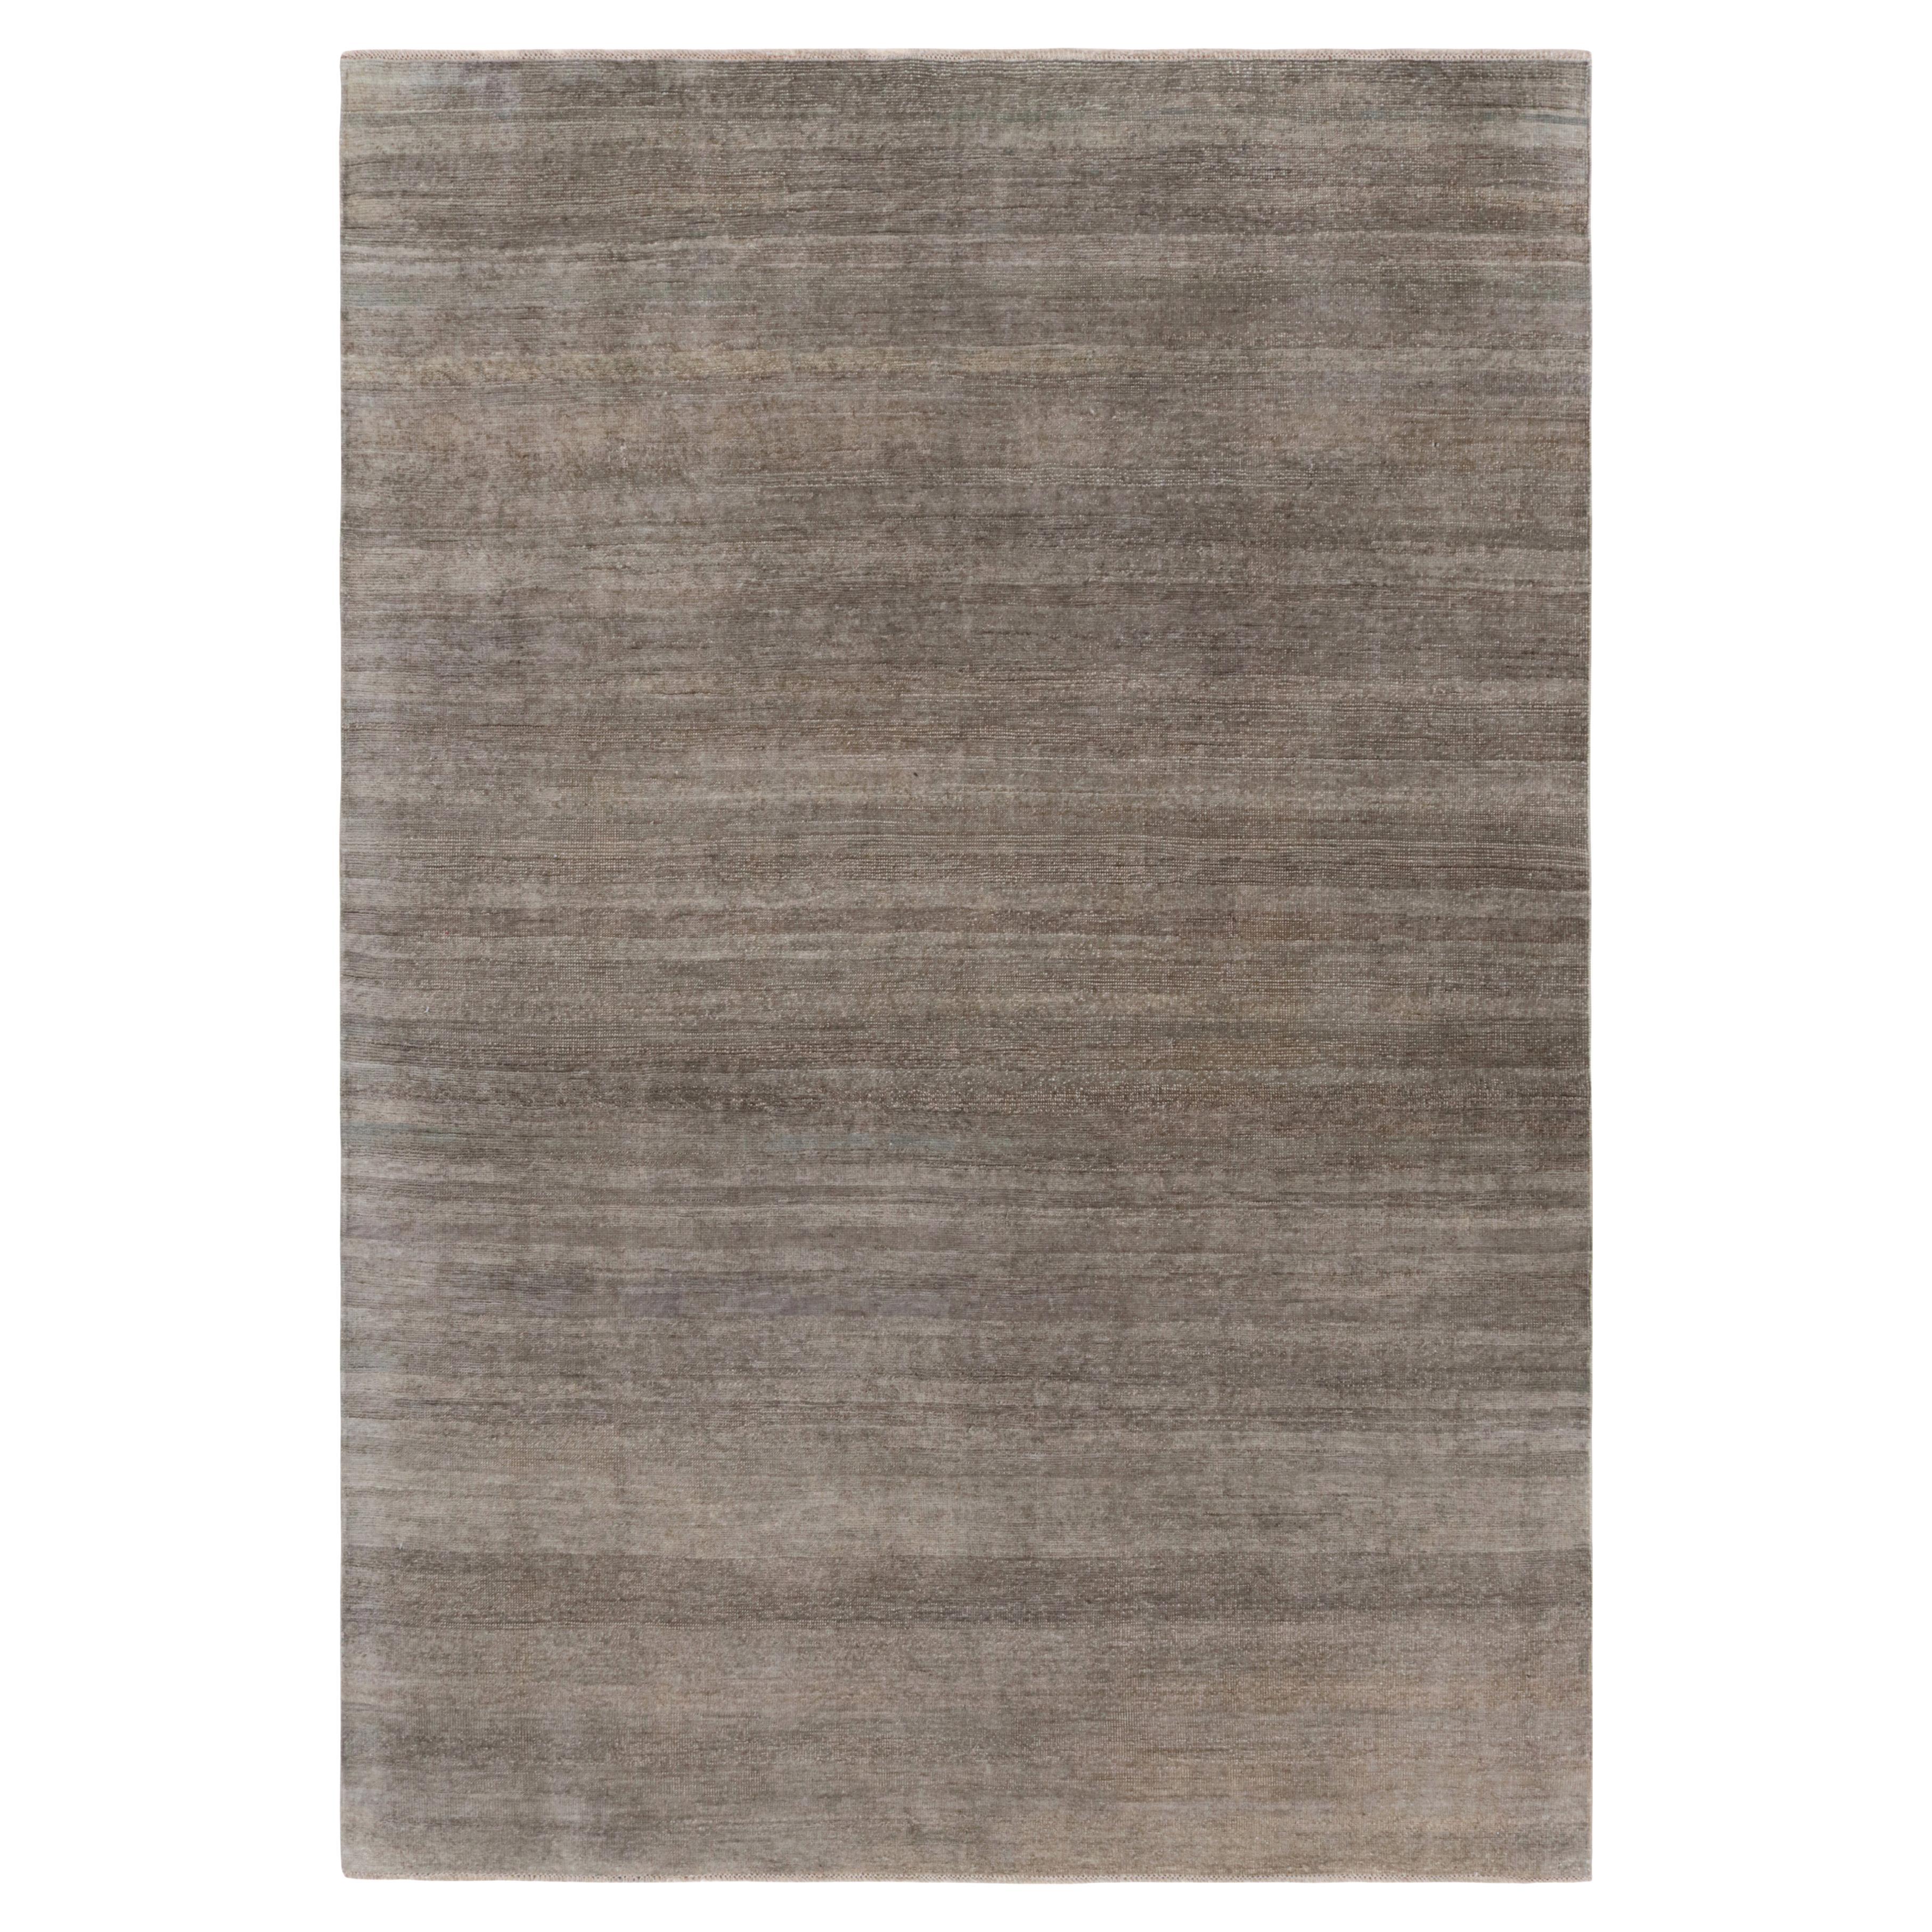 Rug & Kilim's Modern Textural Rug in Gray and Beige-Brown Stripes and Striae (Tapis à rayures et à bandes)